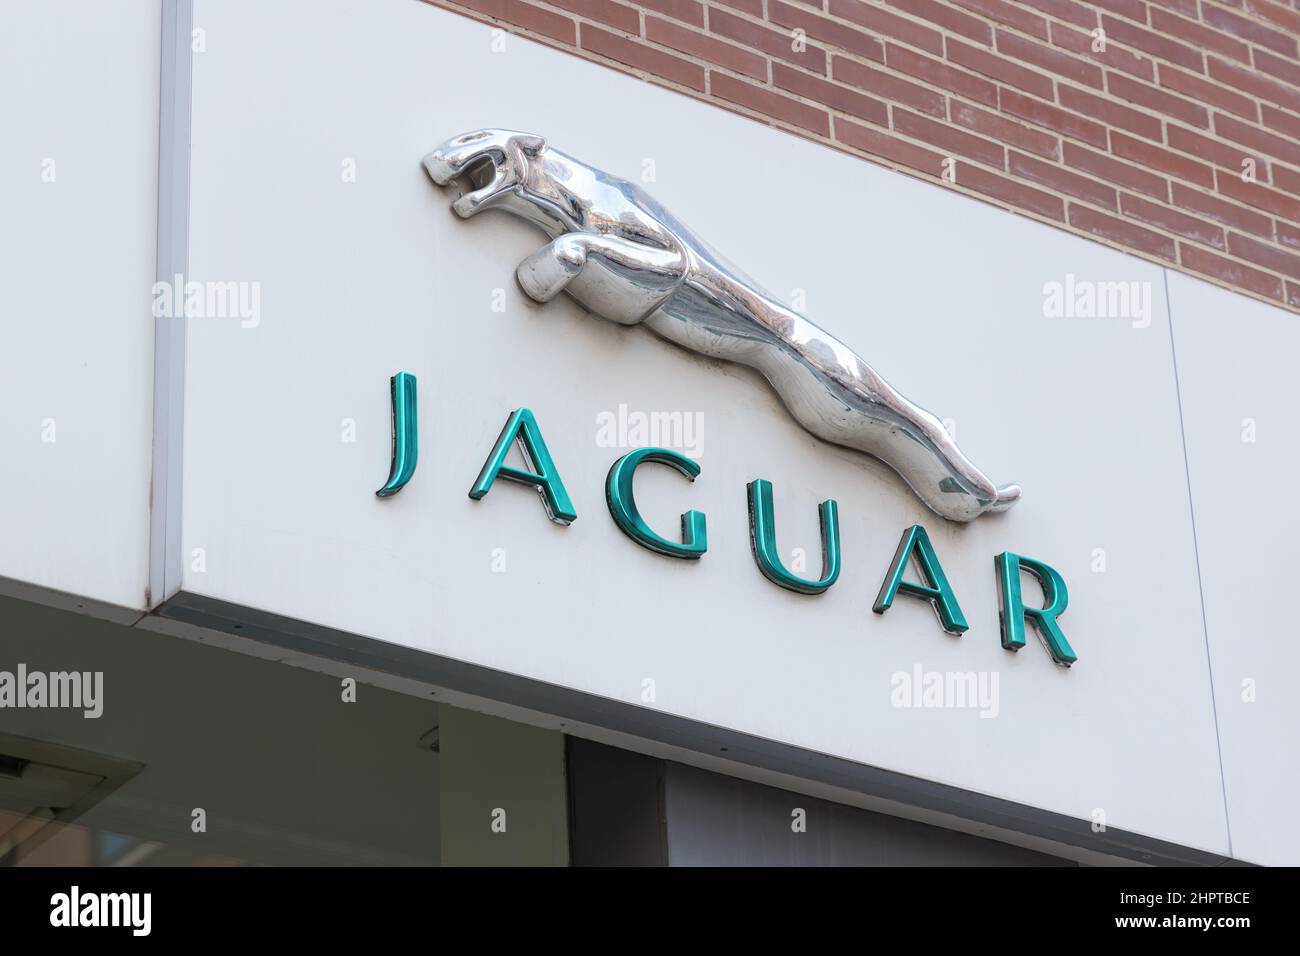 VALENCIA, SPAIN - FEBRUARY 22, 2022: Jaguar is the luxury vehicle brand of Jaguar Land Rover, a British multinational car manufacturer Stock Photo